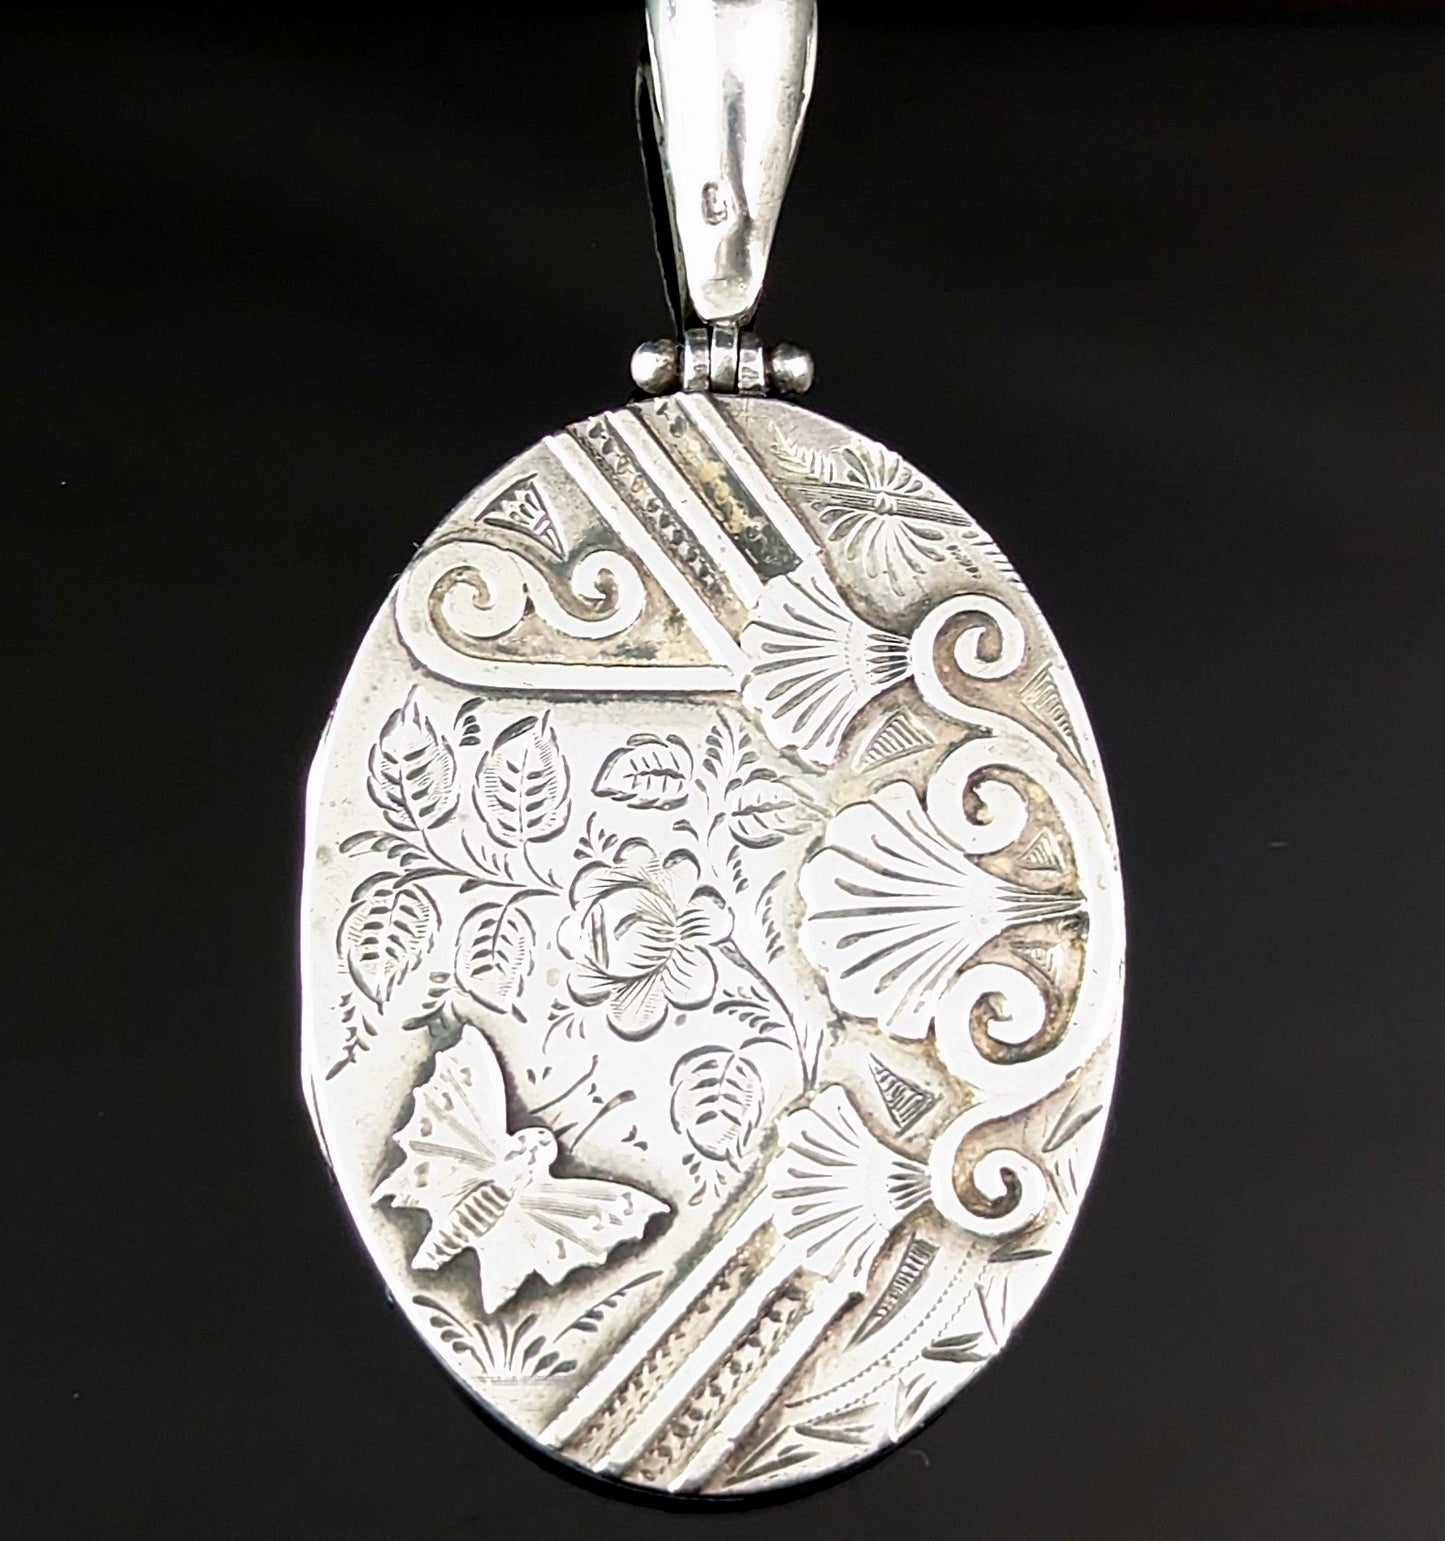 Antique Victorian silver locket pendant, Butterfly and Roses